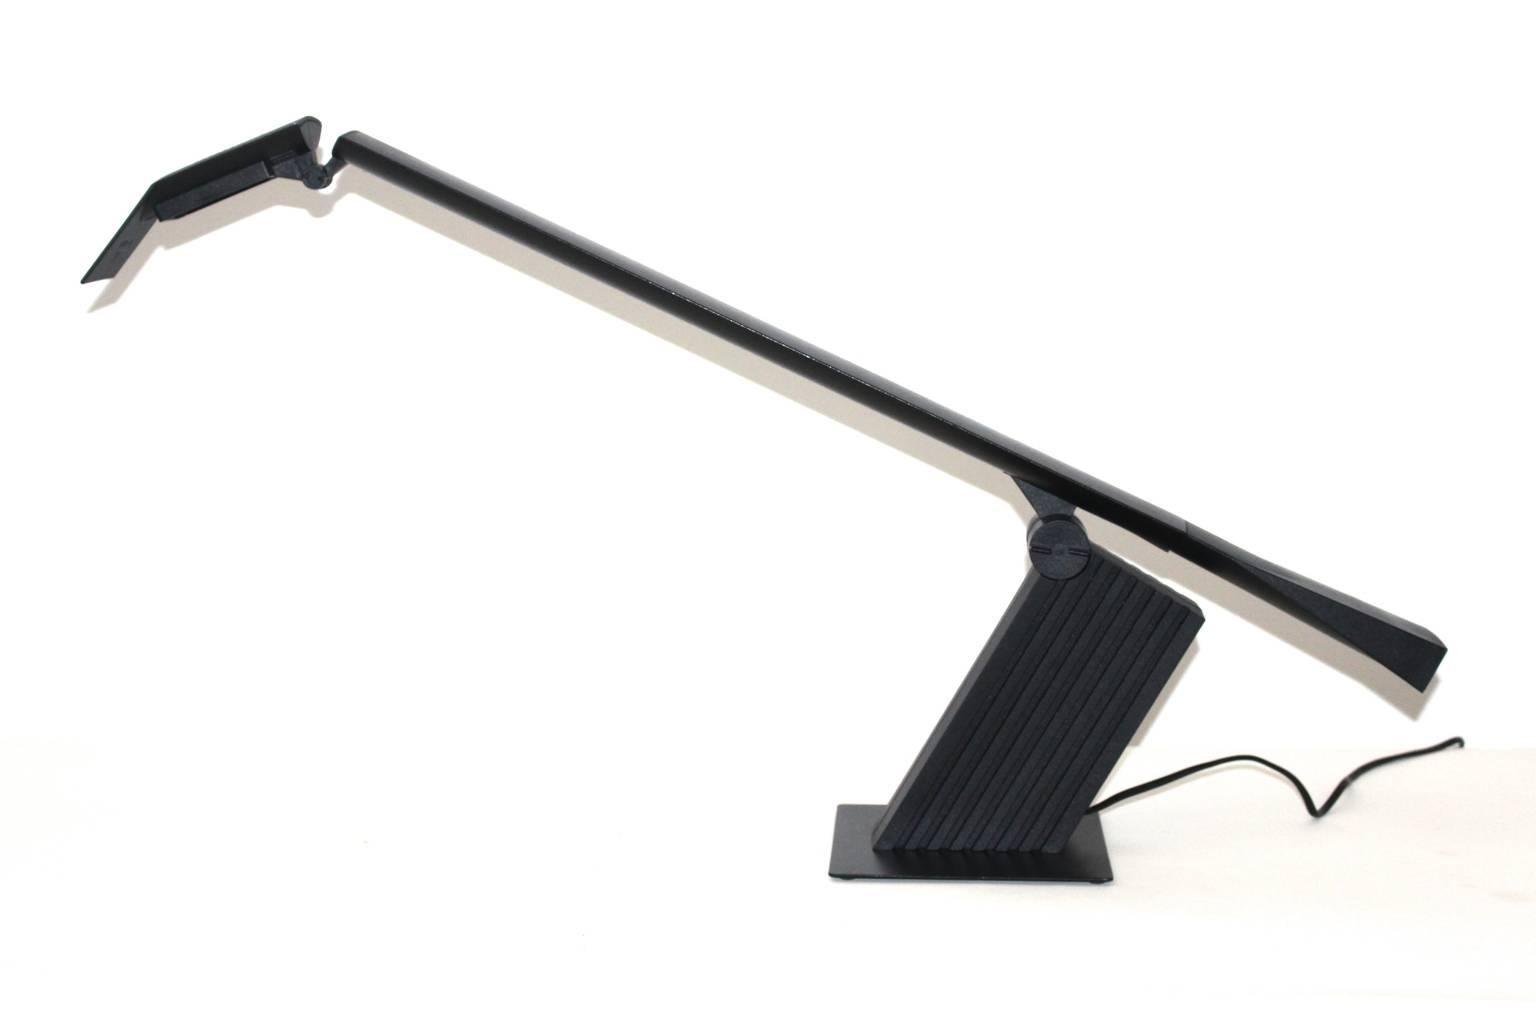 Modernist vintage black lacquered desk or architect lamp designed by Hans Von Klier 1980s and produced by Bilumen, Italy.
Stamped with company´s name Bilumen
The materials are plastic and metal. Furthermore the desk lamp lights with one halogen bulb